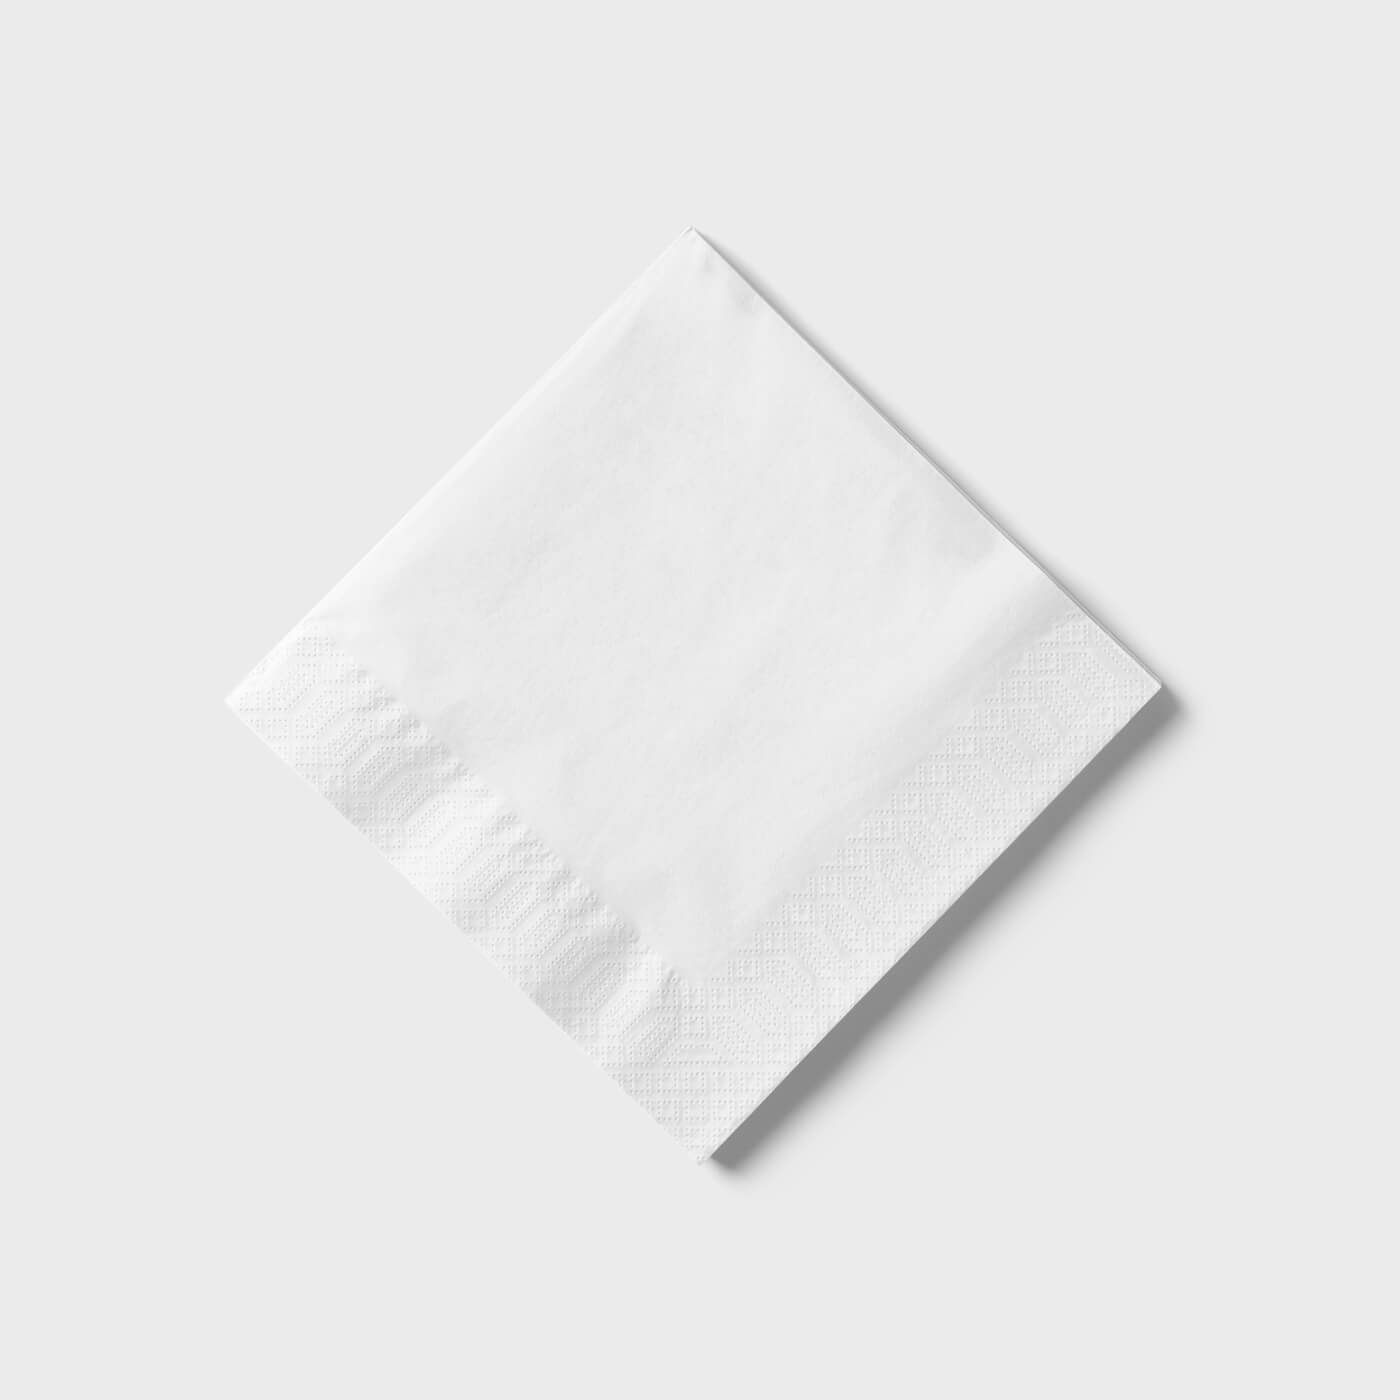 Top View of a Folded Paper Napkin Mockup